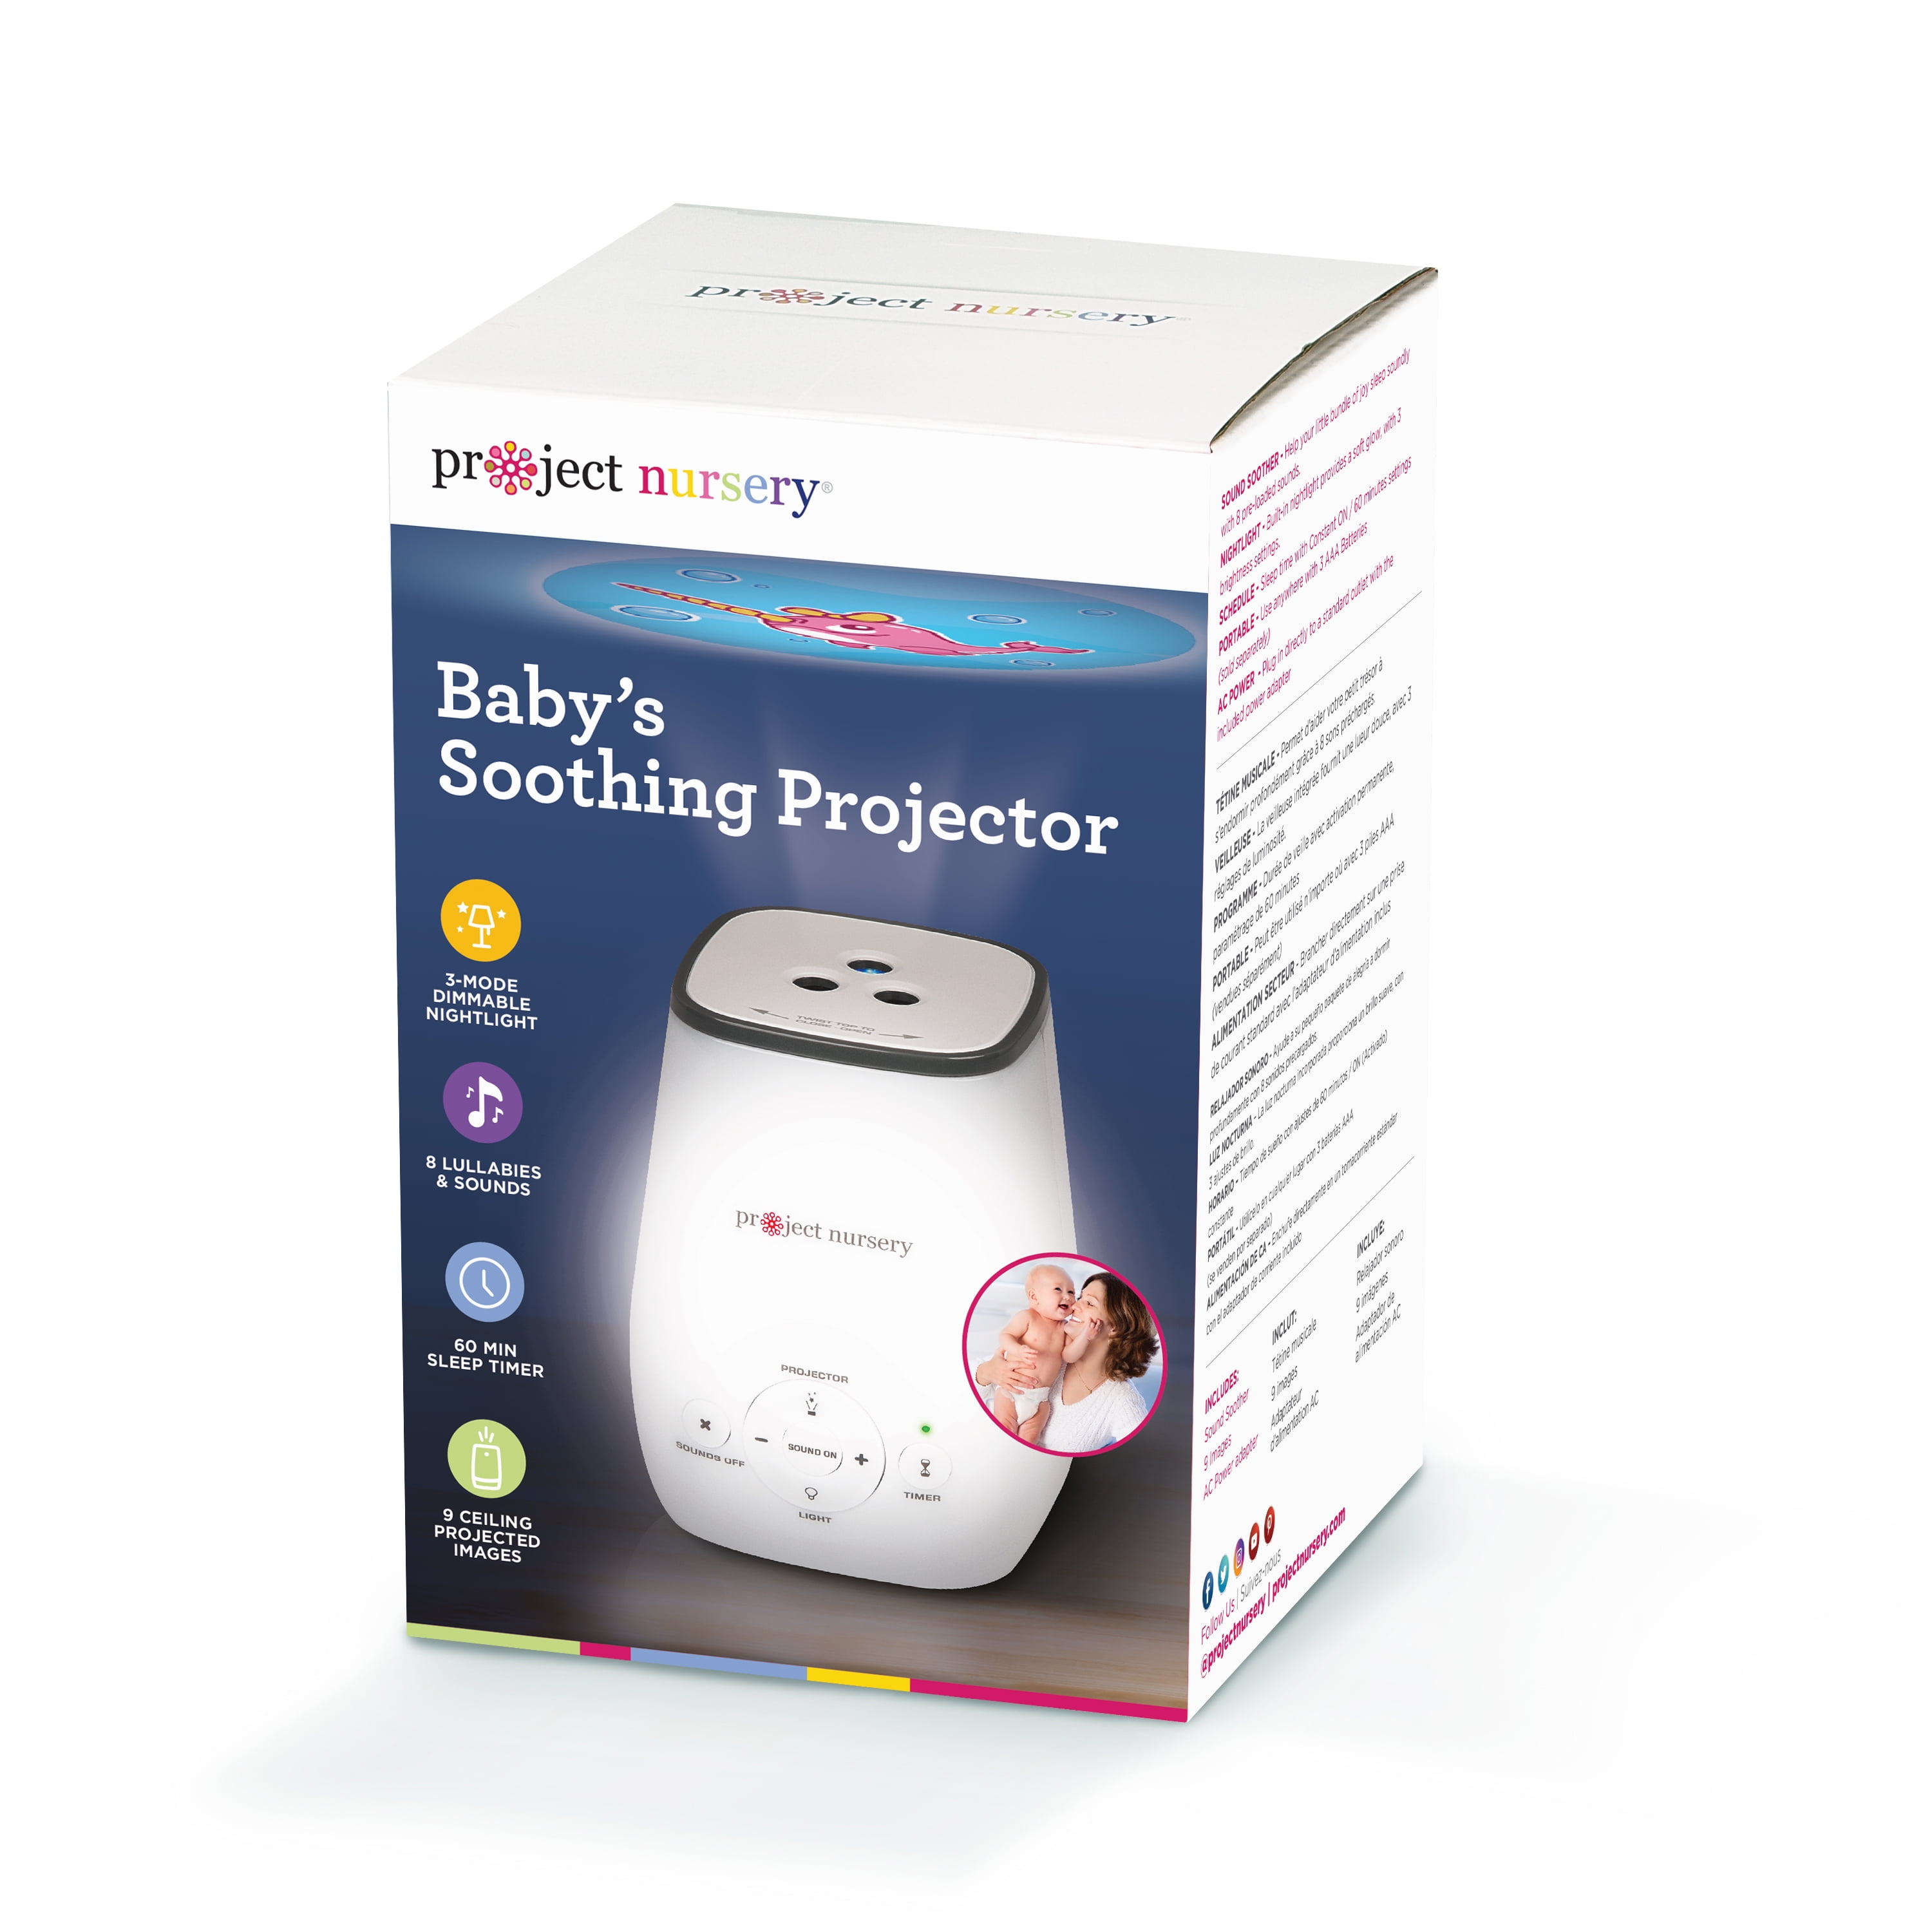 alledaags Autorisatie Decoderen Project Nursery 4-in-1 Soothing Projector with 8 Pre-Loaded Sounds,  Nightlight and Timer - White - Walmart.com